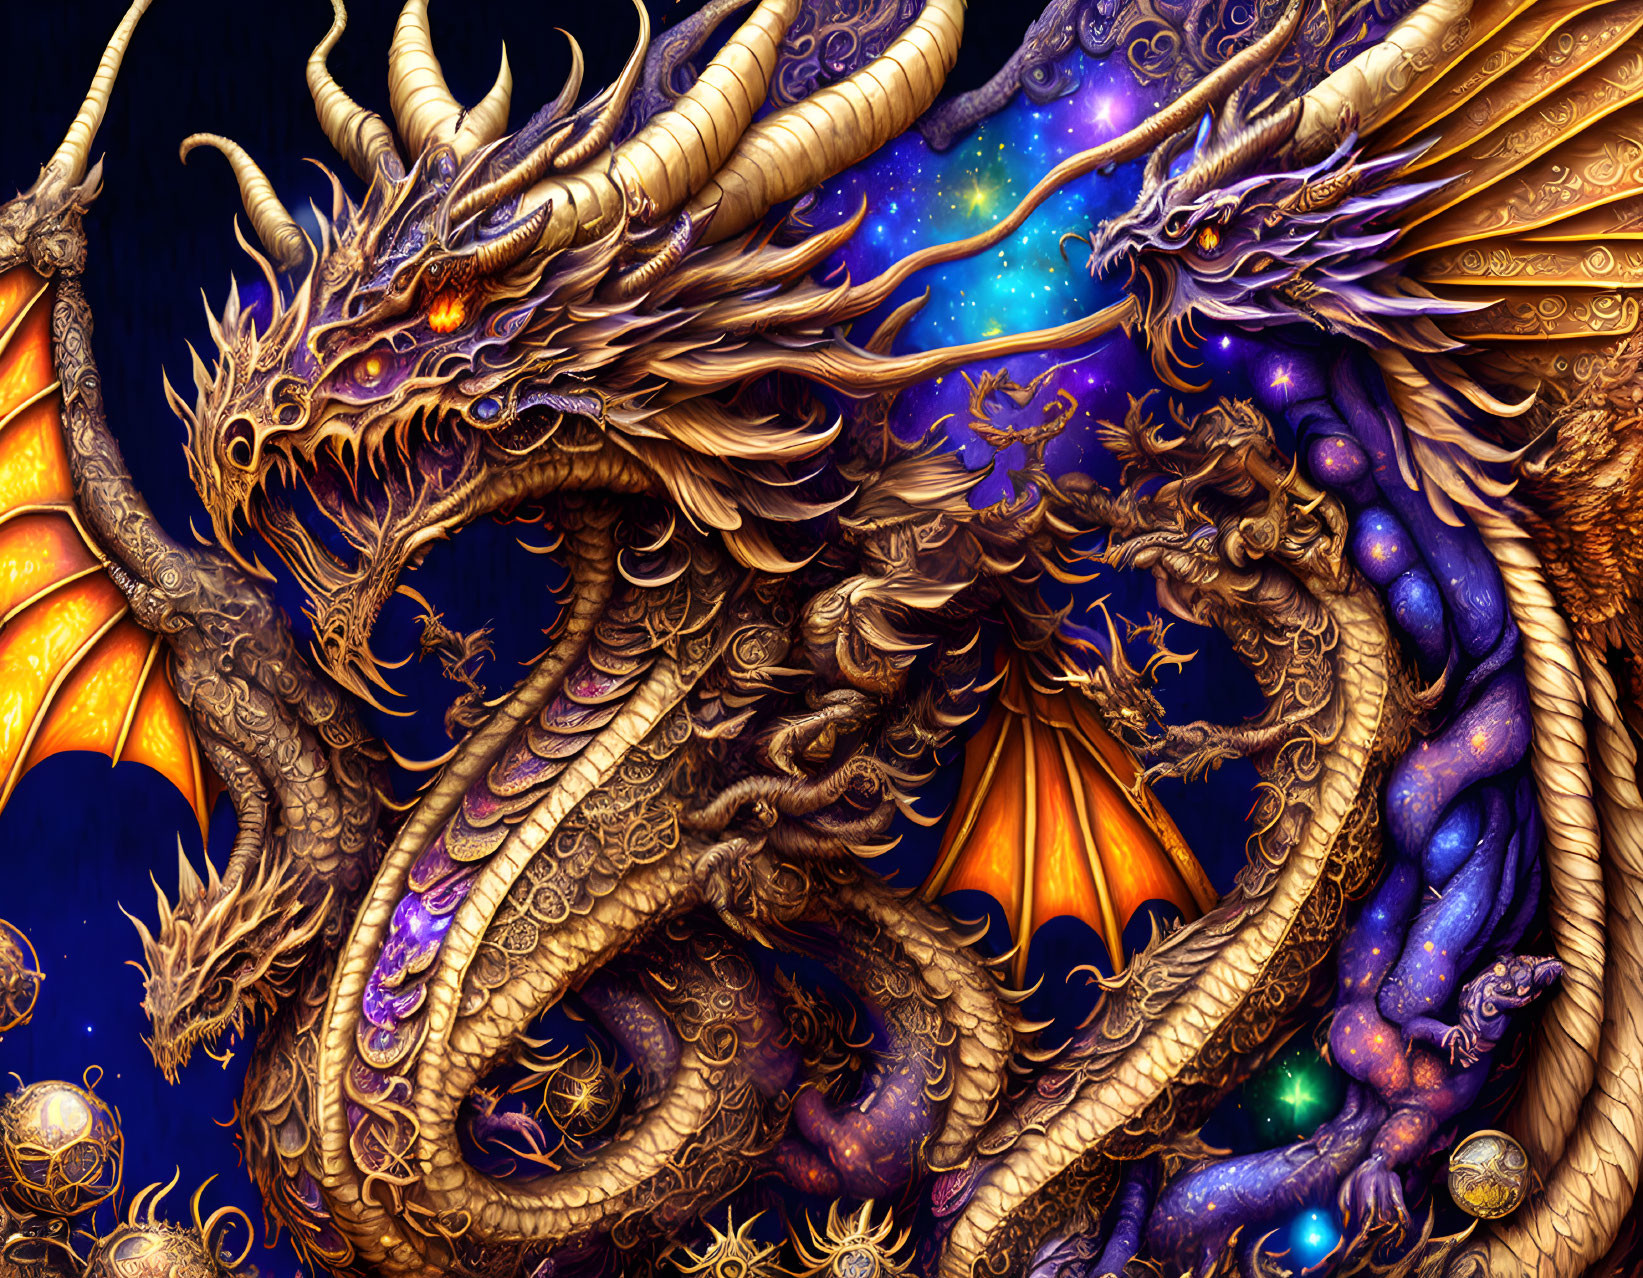 Majestic dragon with cosmic wings and ornate scales in starry setting